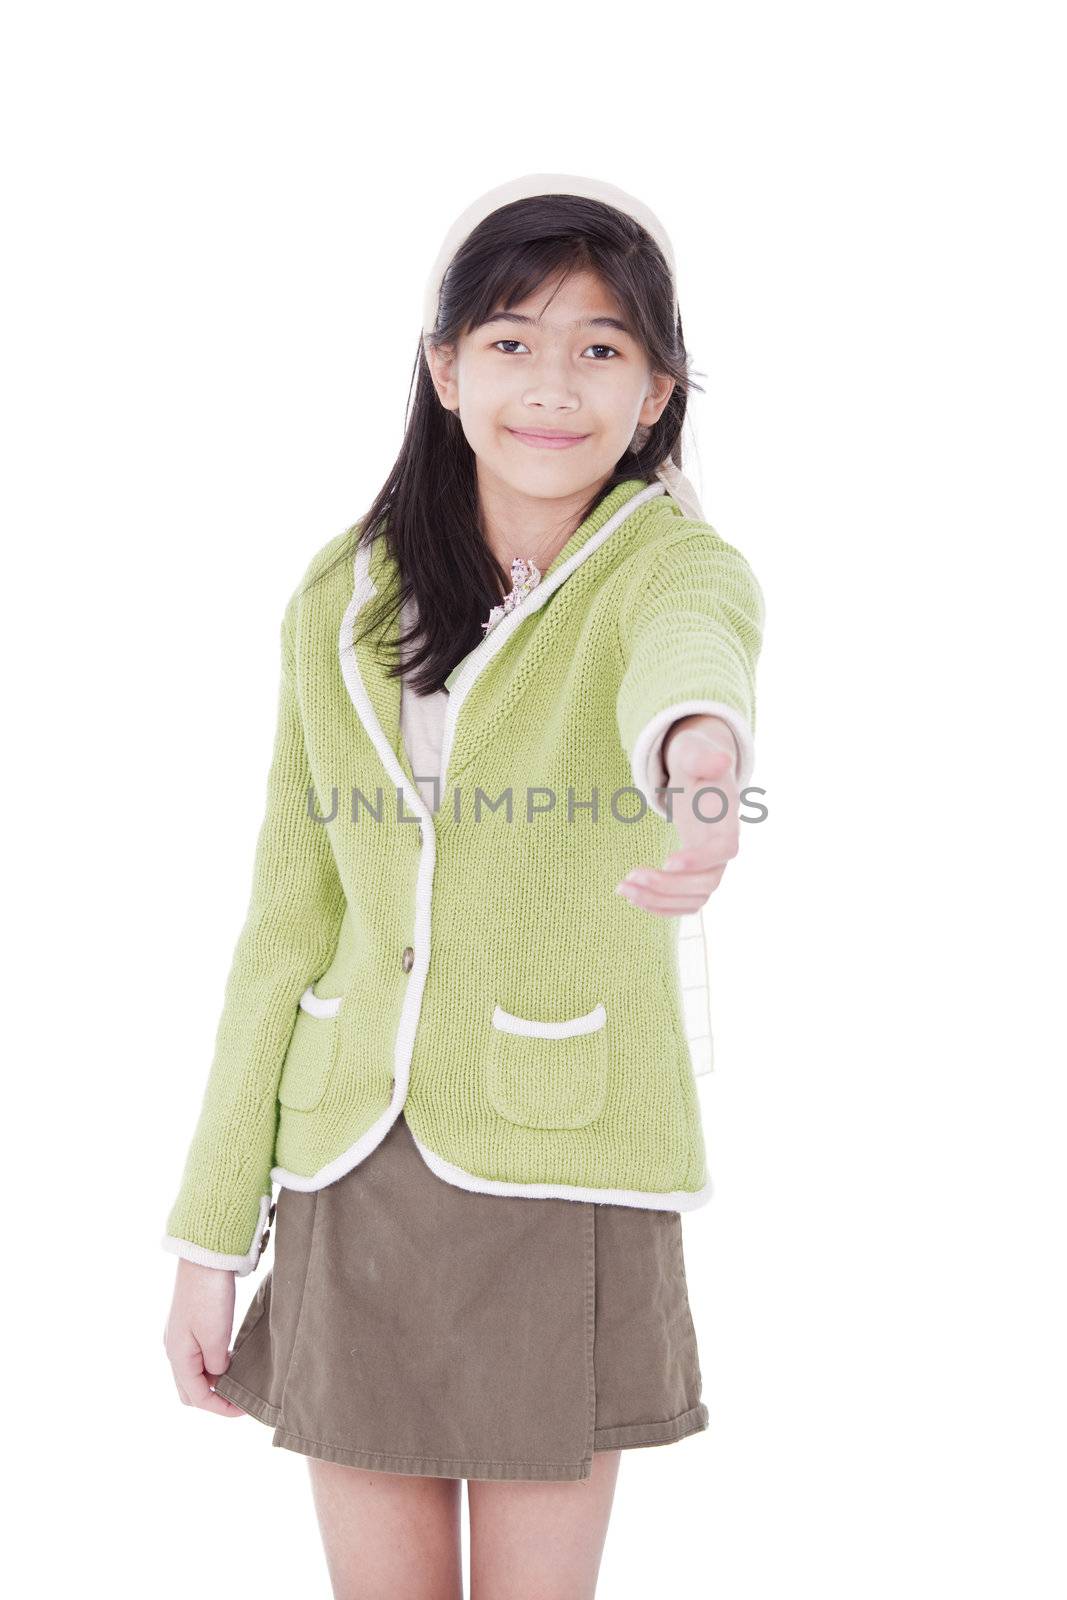 Girl in lime green sweater extending hand in greeting by jarenwicklund